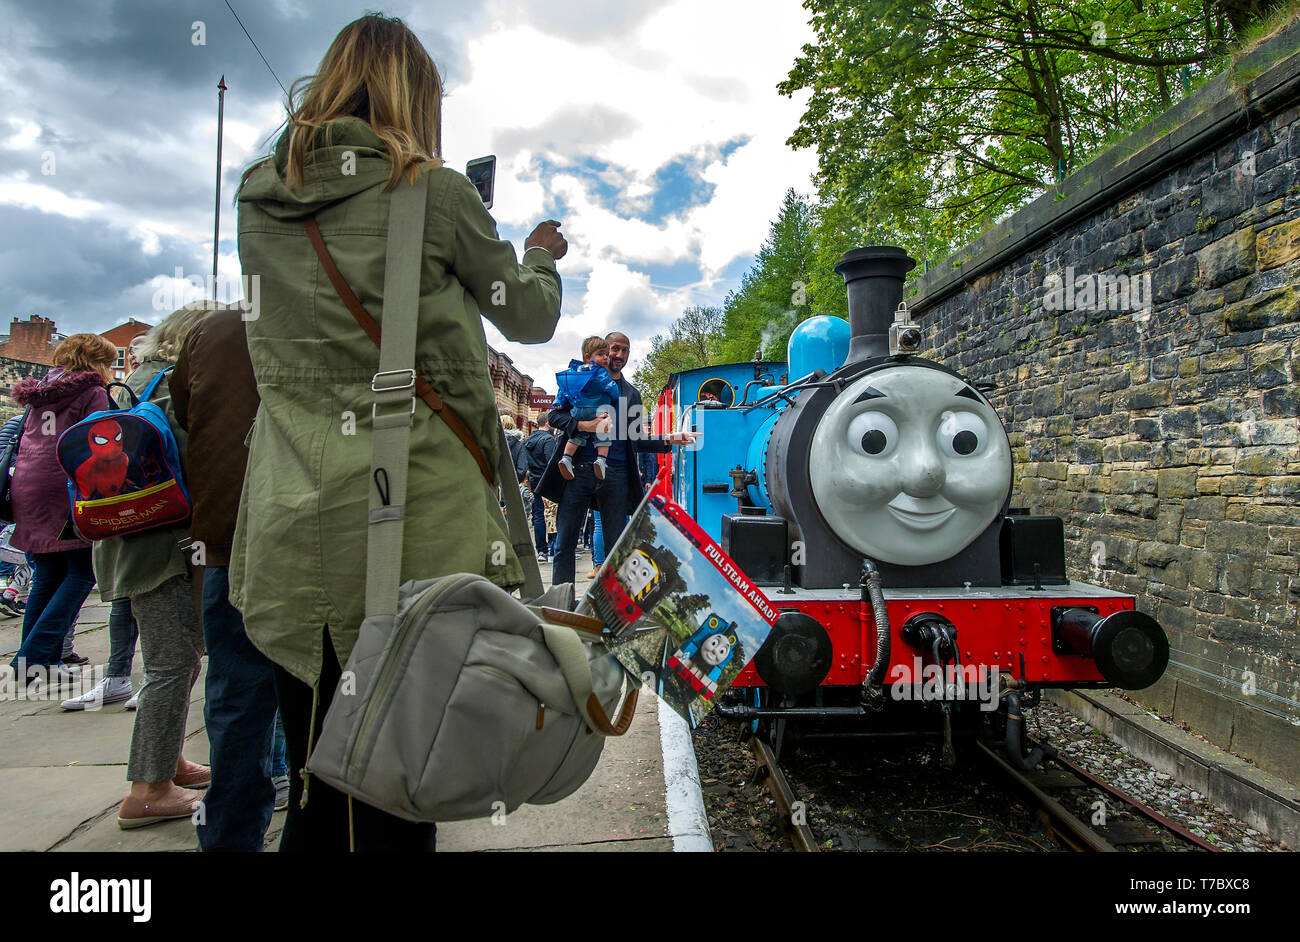 Bury, Lancashire, UK. 6th May, 2019. Hundreds of visitors flocked to the annual Day Out With Thomas event at the East Lancashire Railway, Bury, Lancashire. Youngsters got ride along the tracks behind the famous little blue tank engine and there was also a visit by the Fat Controller amongst many other themed activities throughout the Bank Holiday weekend. Picture by Credit: Paul Heyes/Alamy Live News Stock Photo